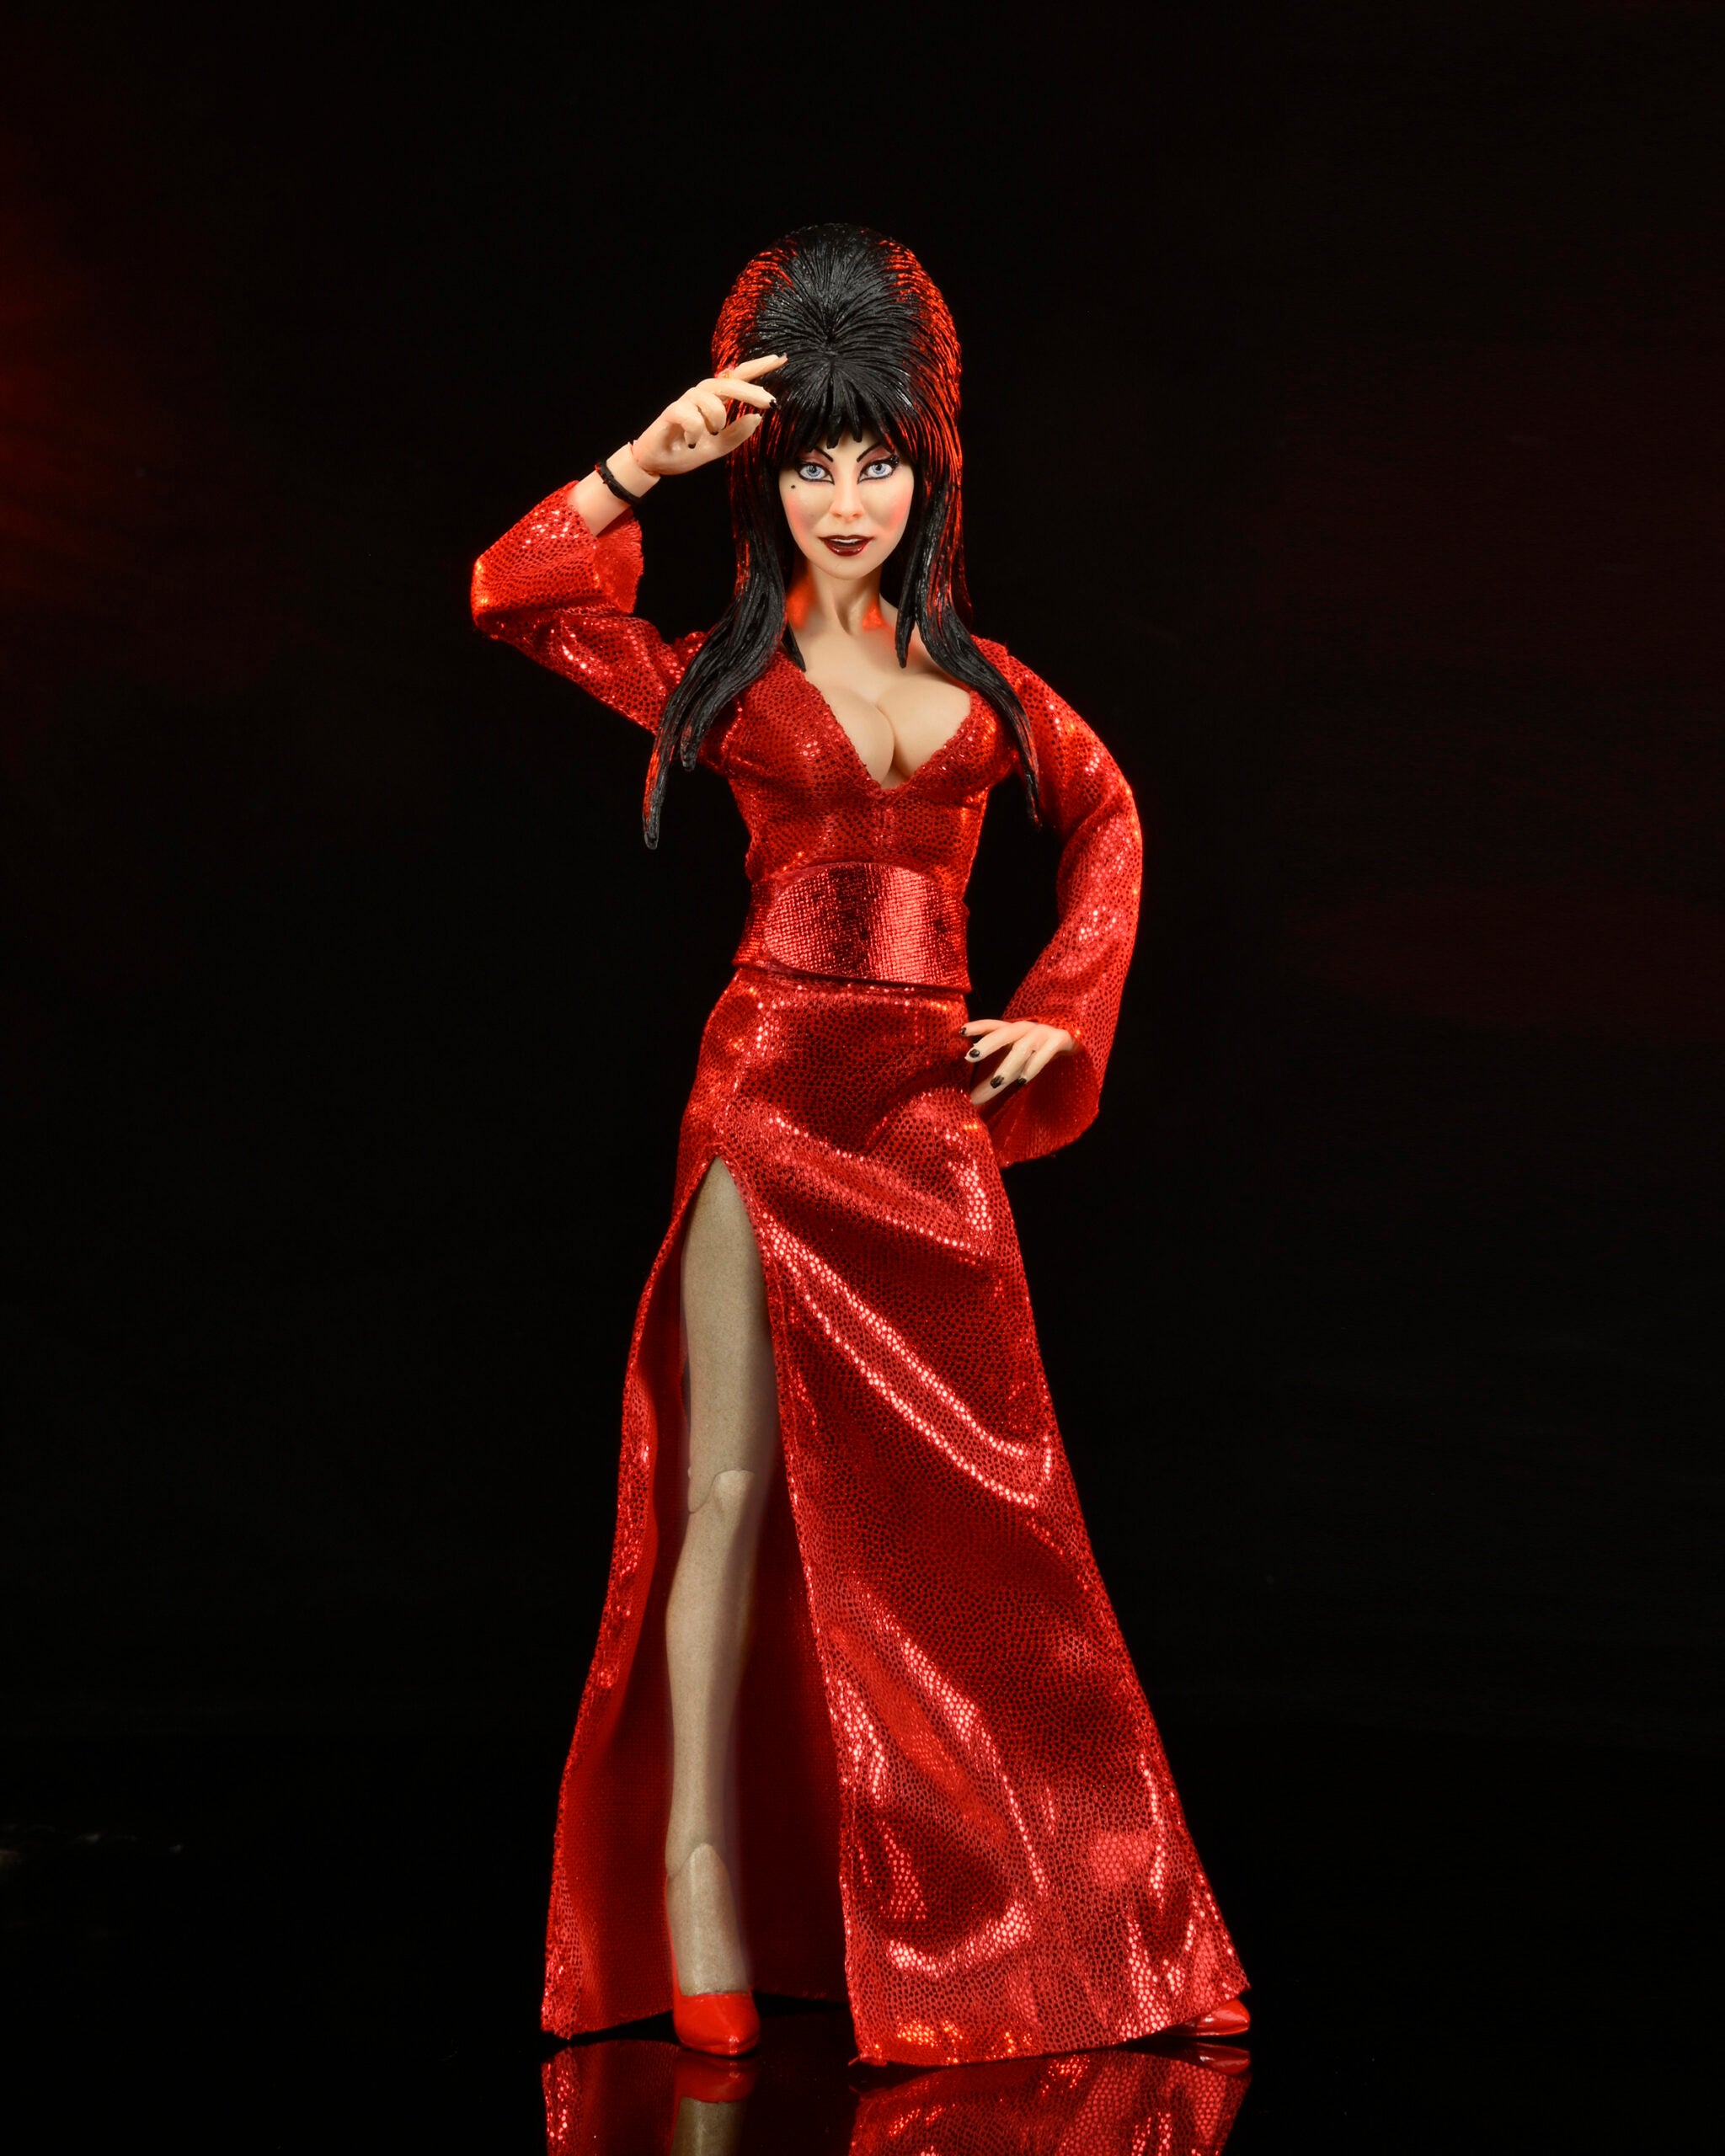 Neca - 8" Clothed Action Figure - Elvira, Mistress of the Dark (Red, Fright & Boo Ver.) - Marvelous Toys